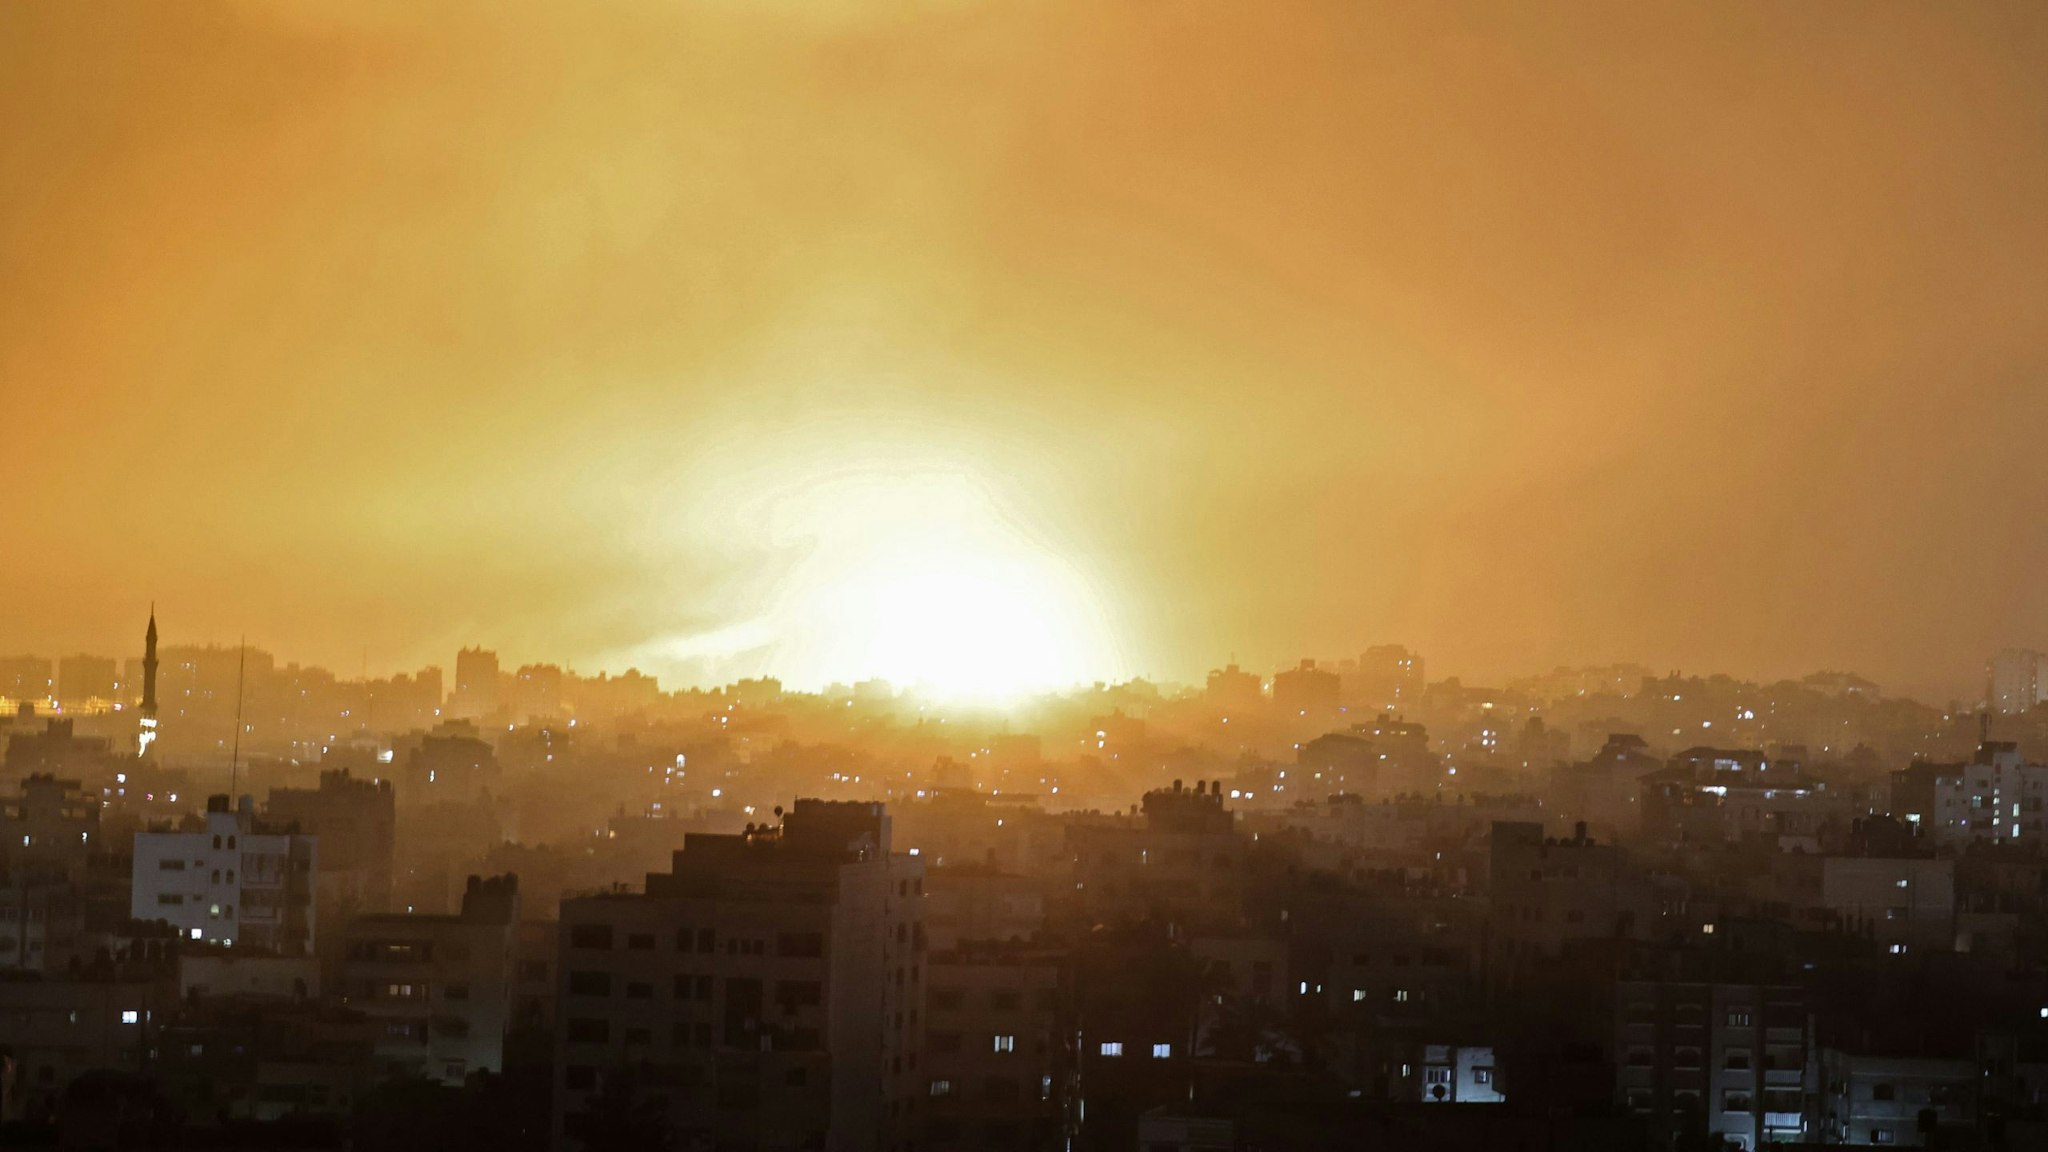 TOPSHOT - An explosion lights the sky following an Israeli air strike on Beit Lahia in the northern Gaza Strip on May 14, 2021.